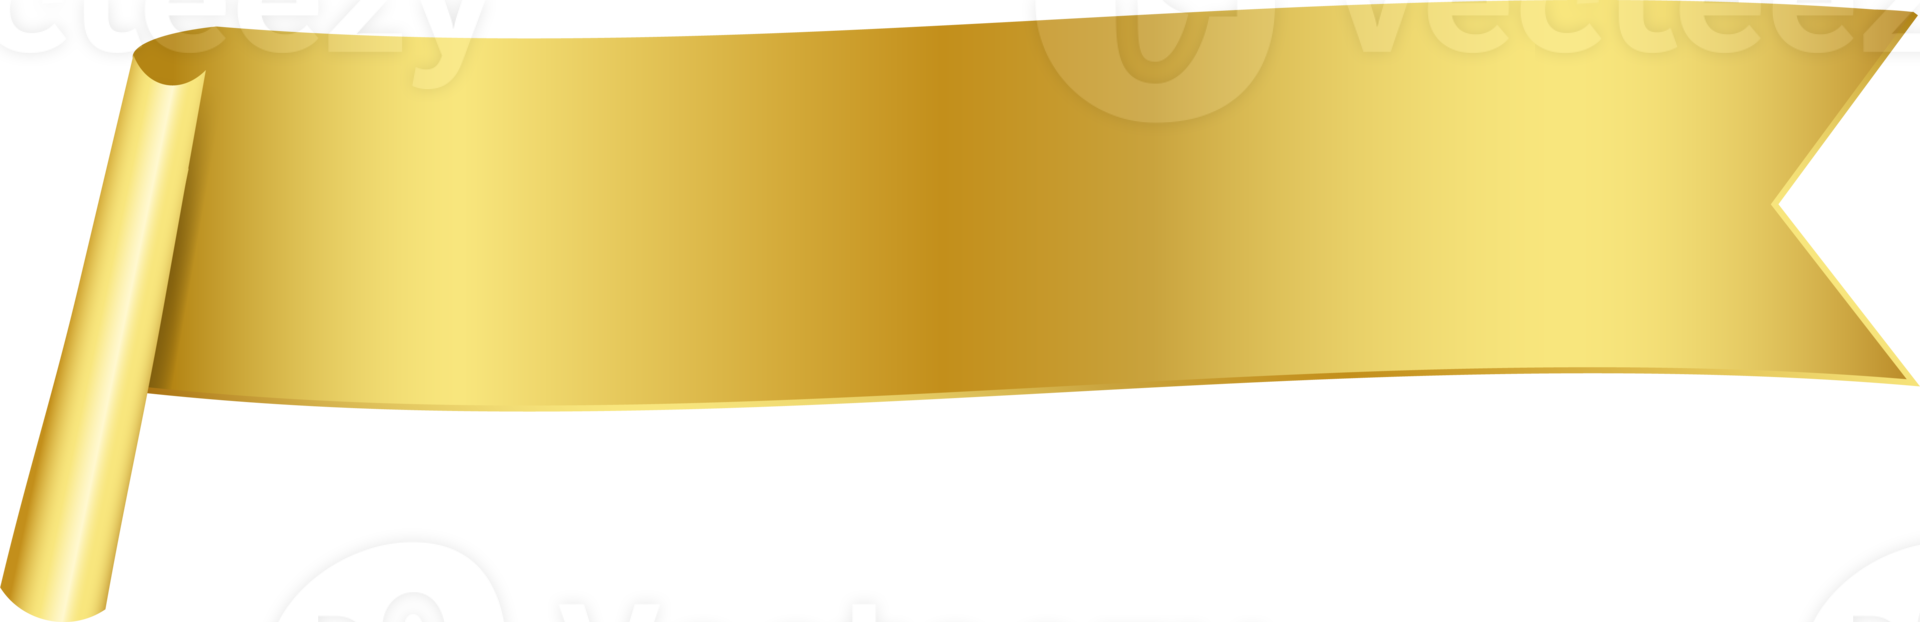 Gold ribbon banner tag label design, isolated background png